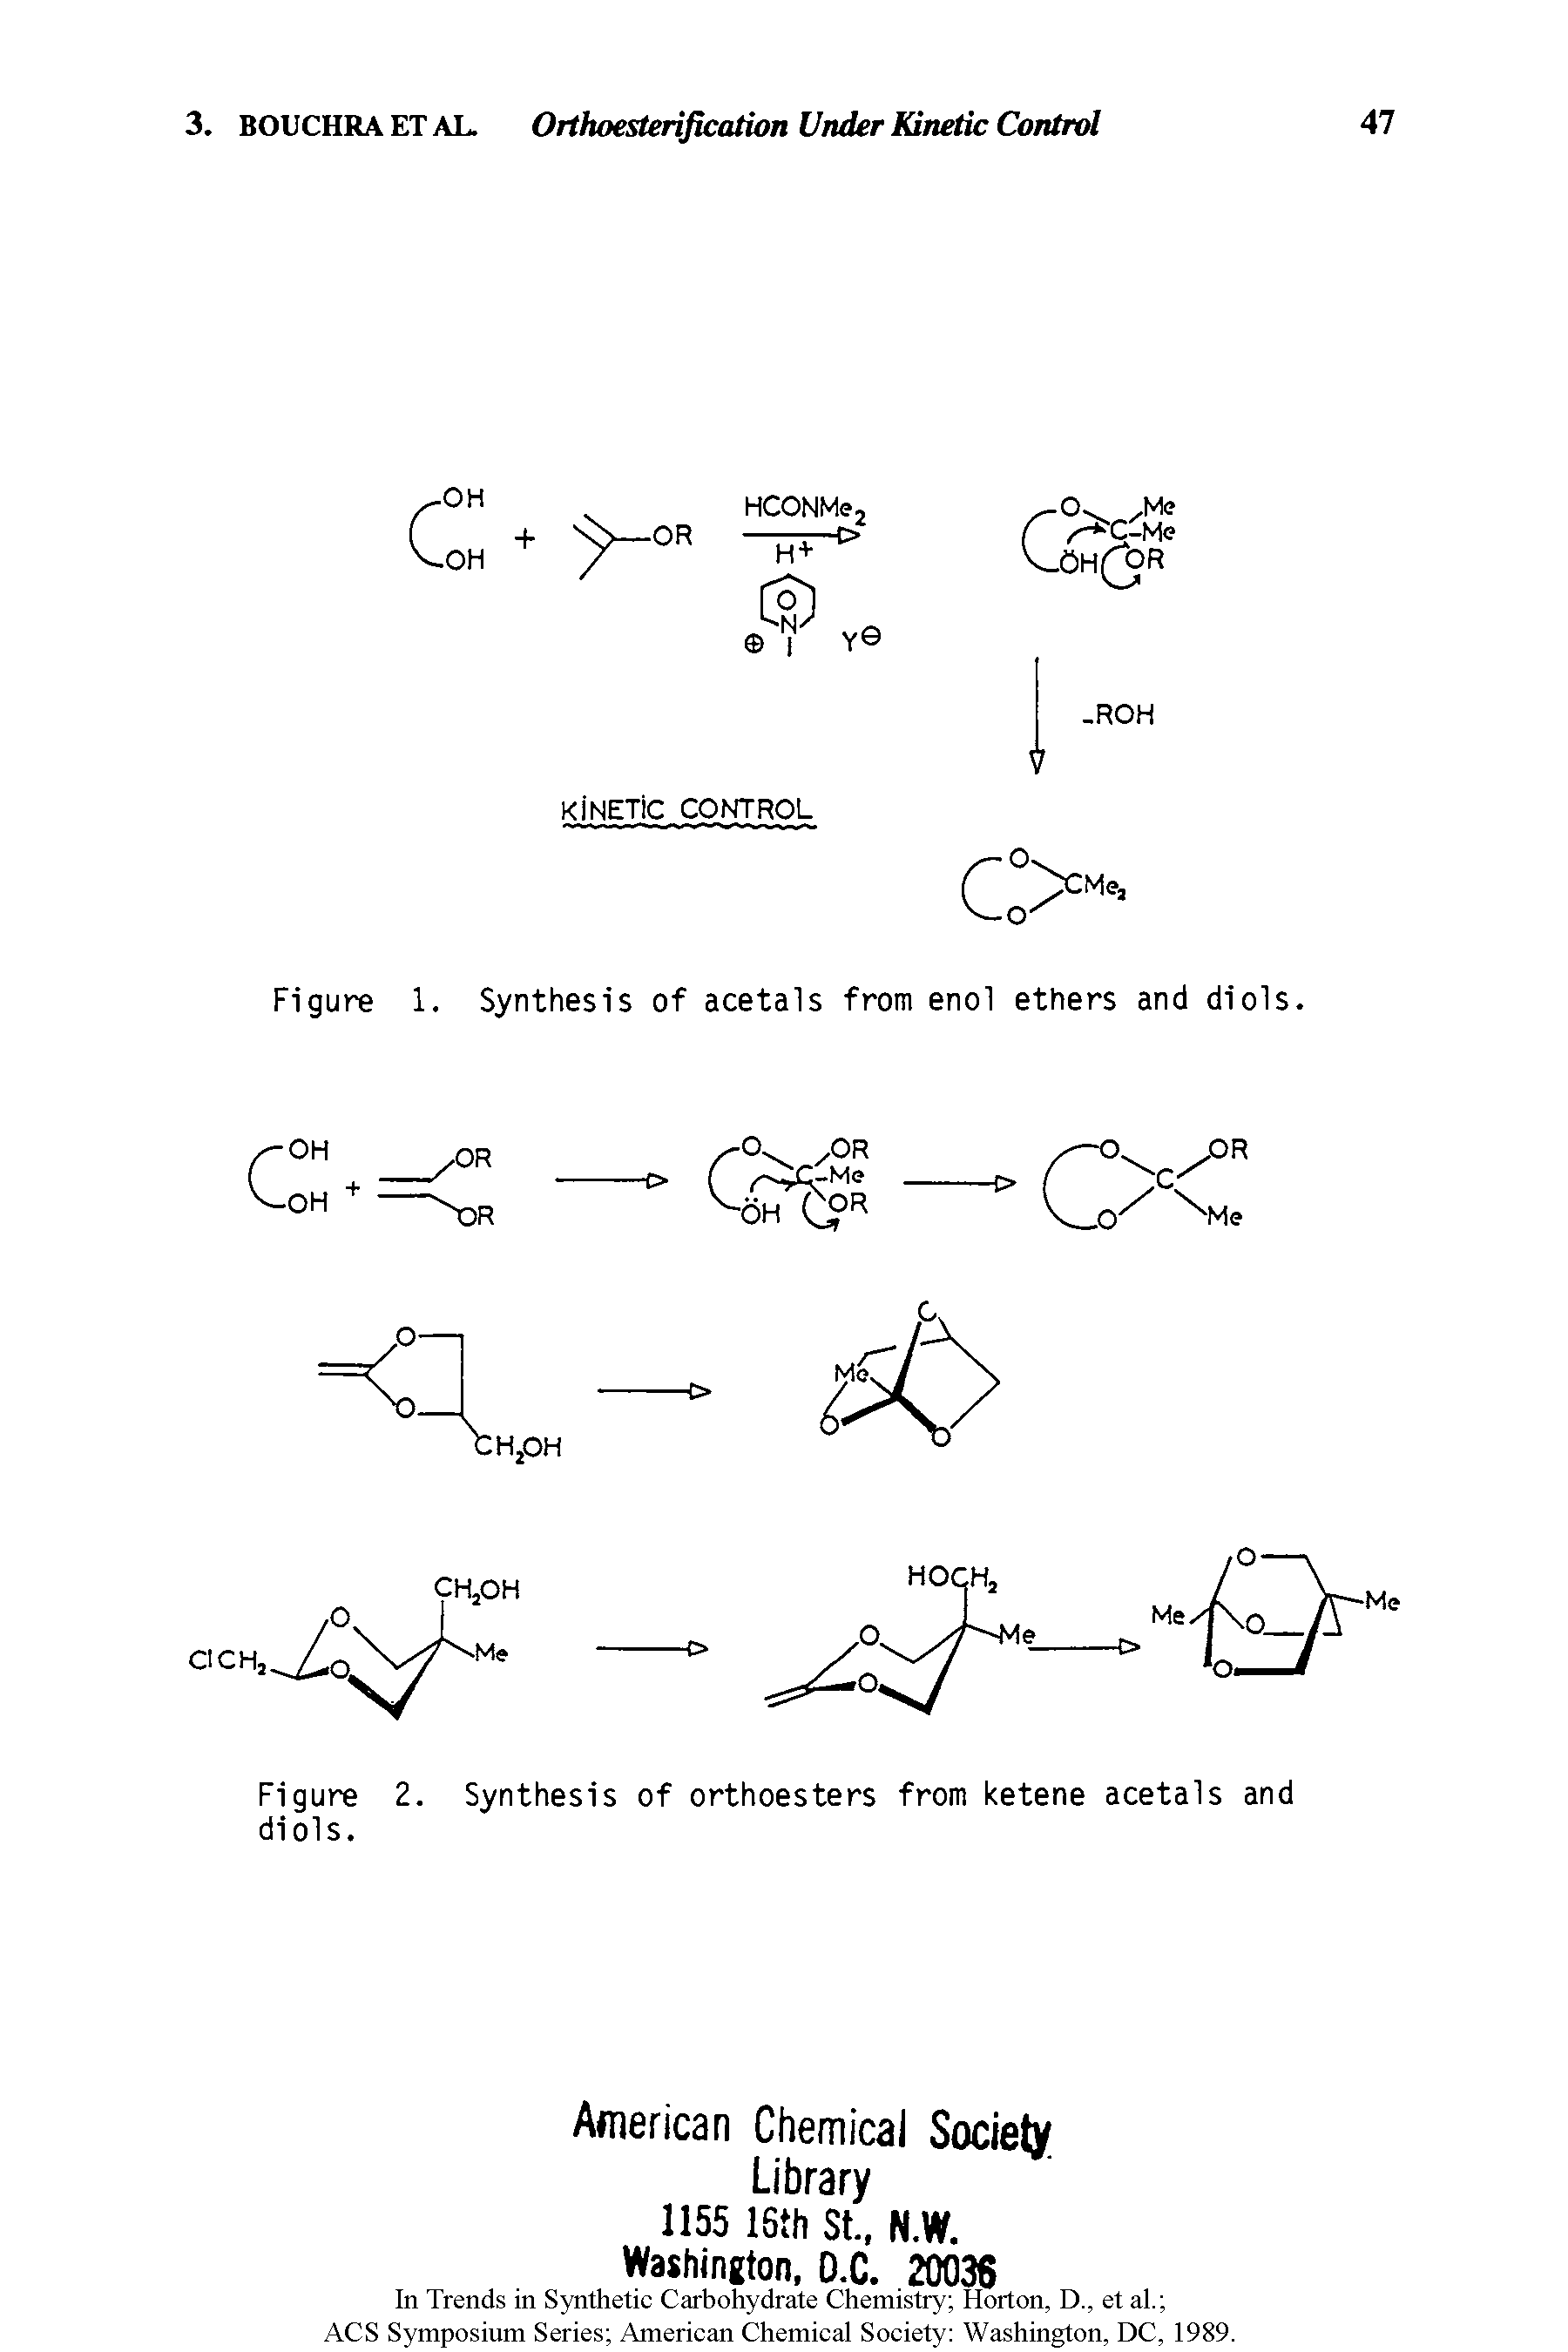 Figure 1. Synthesis of acetals from enol ethers and diols.